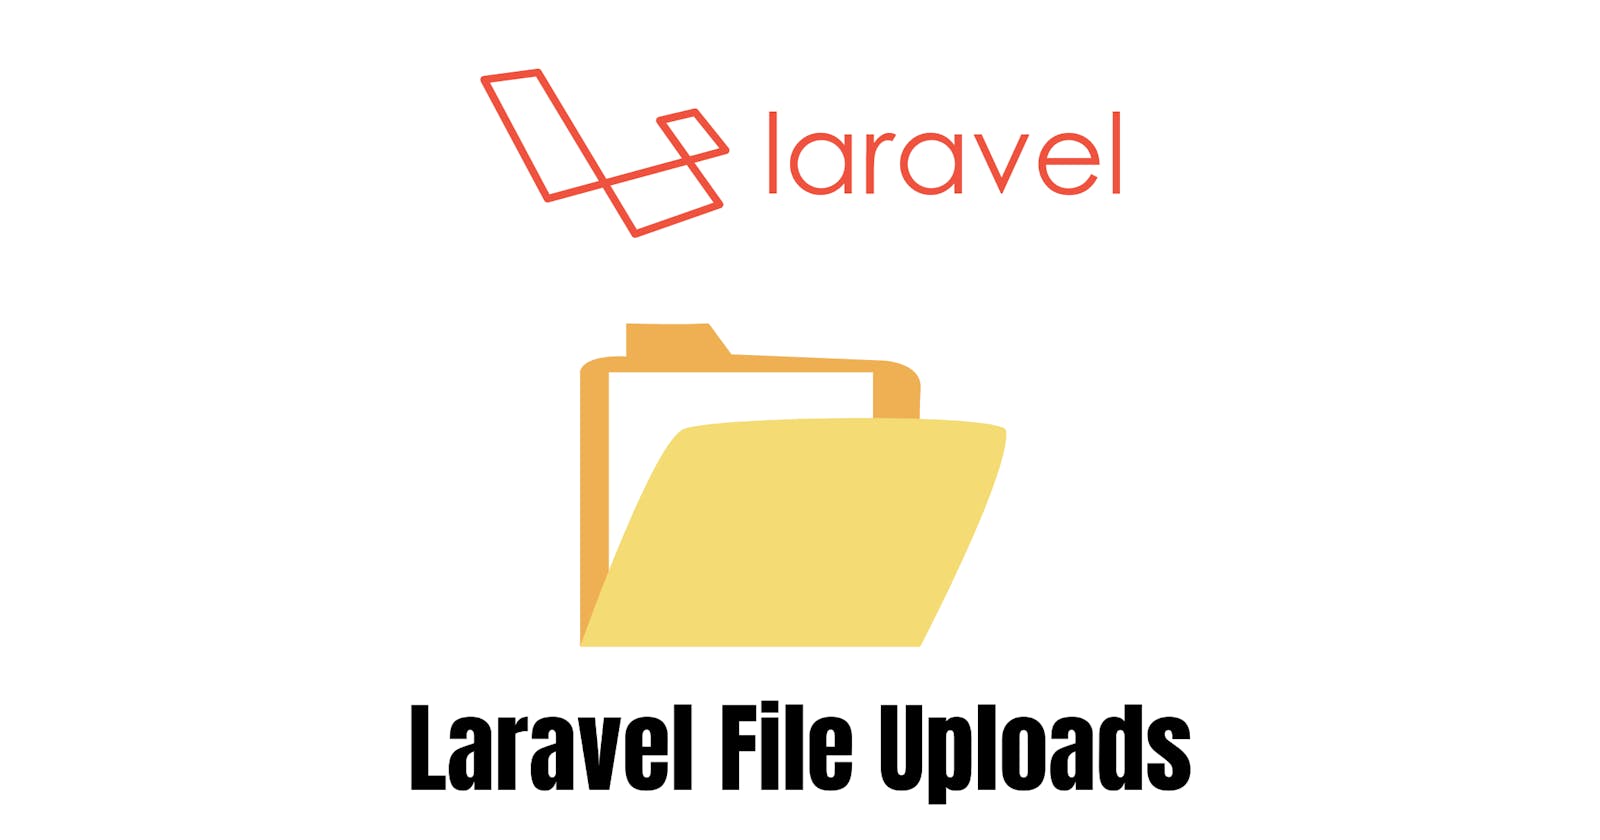 Laravel File Upload: A Complete Tutorial and Guide